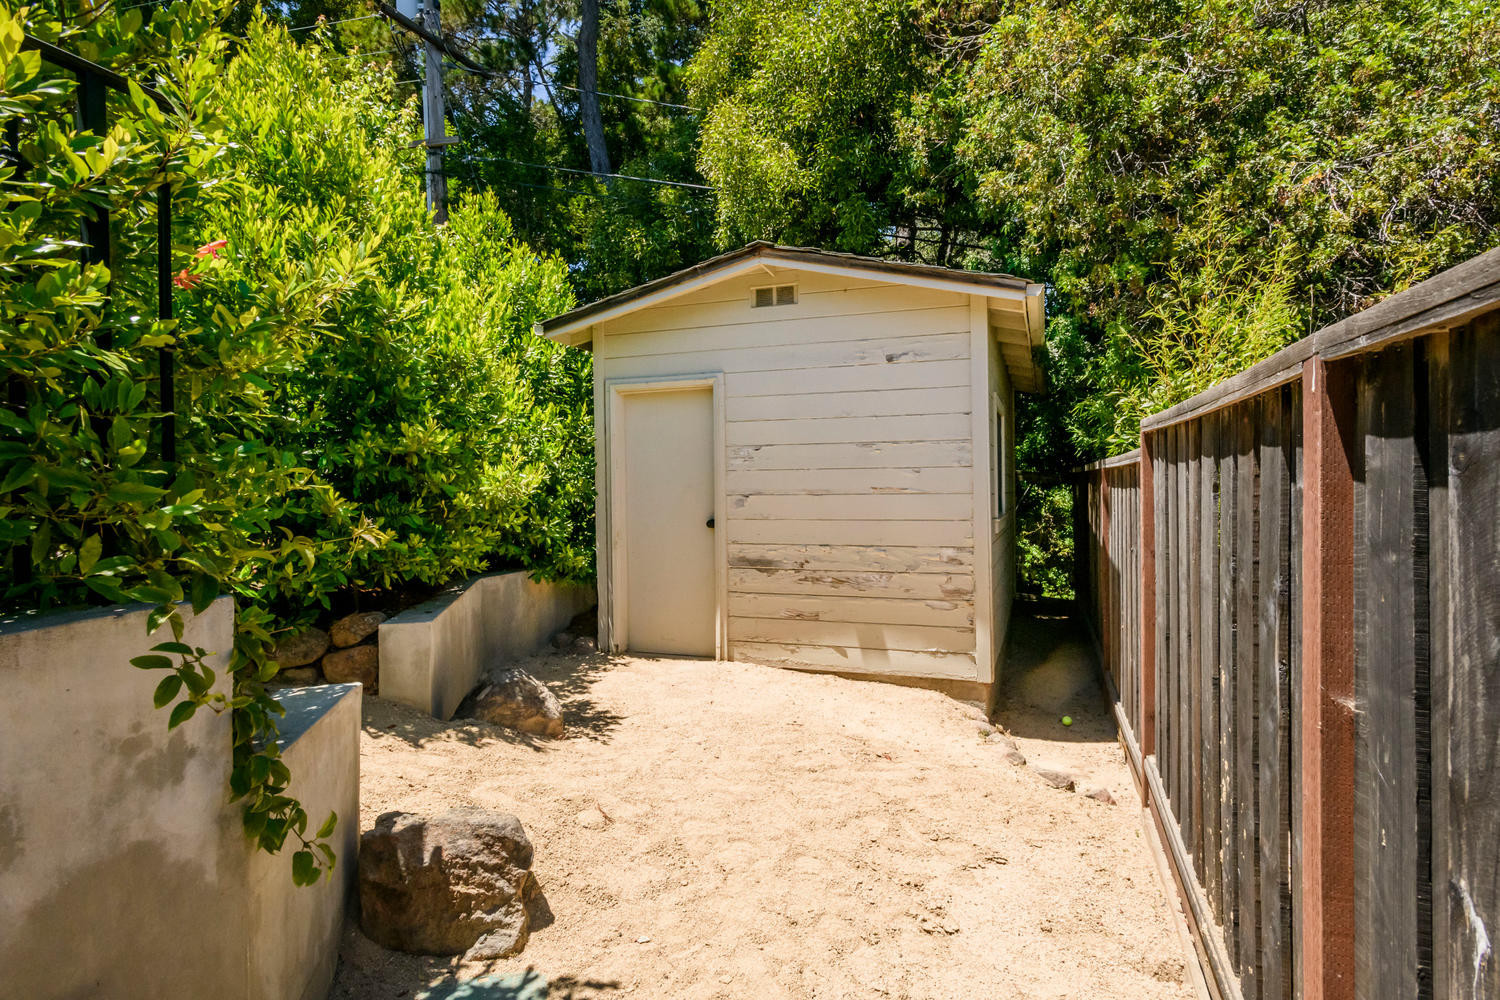 2508 Valdivia Way Shed in Ray Park Neighborhood in Burlingame.